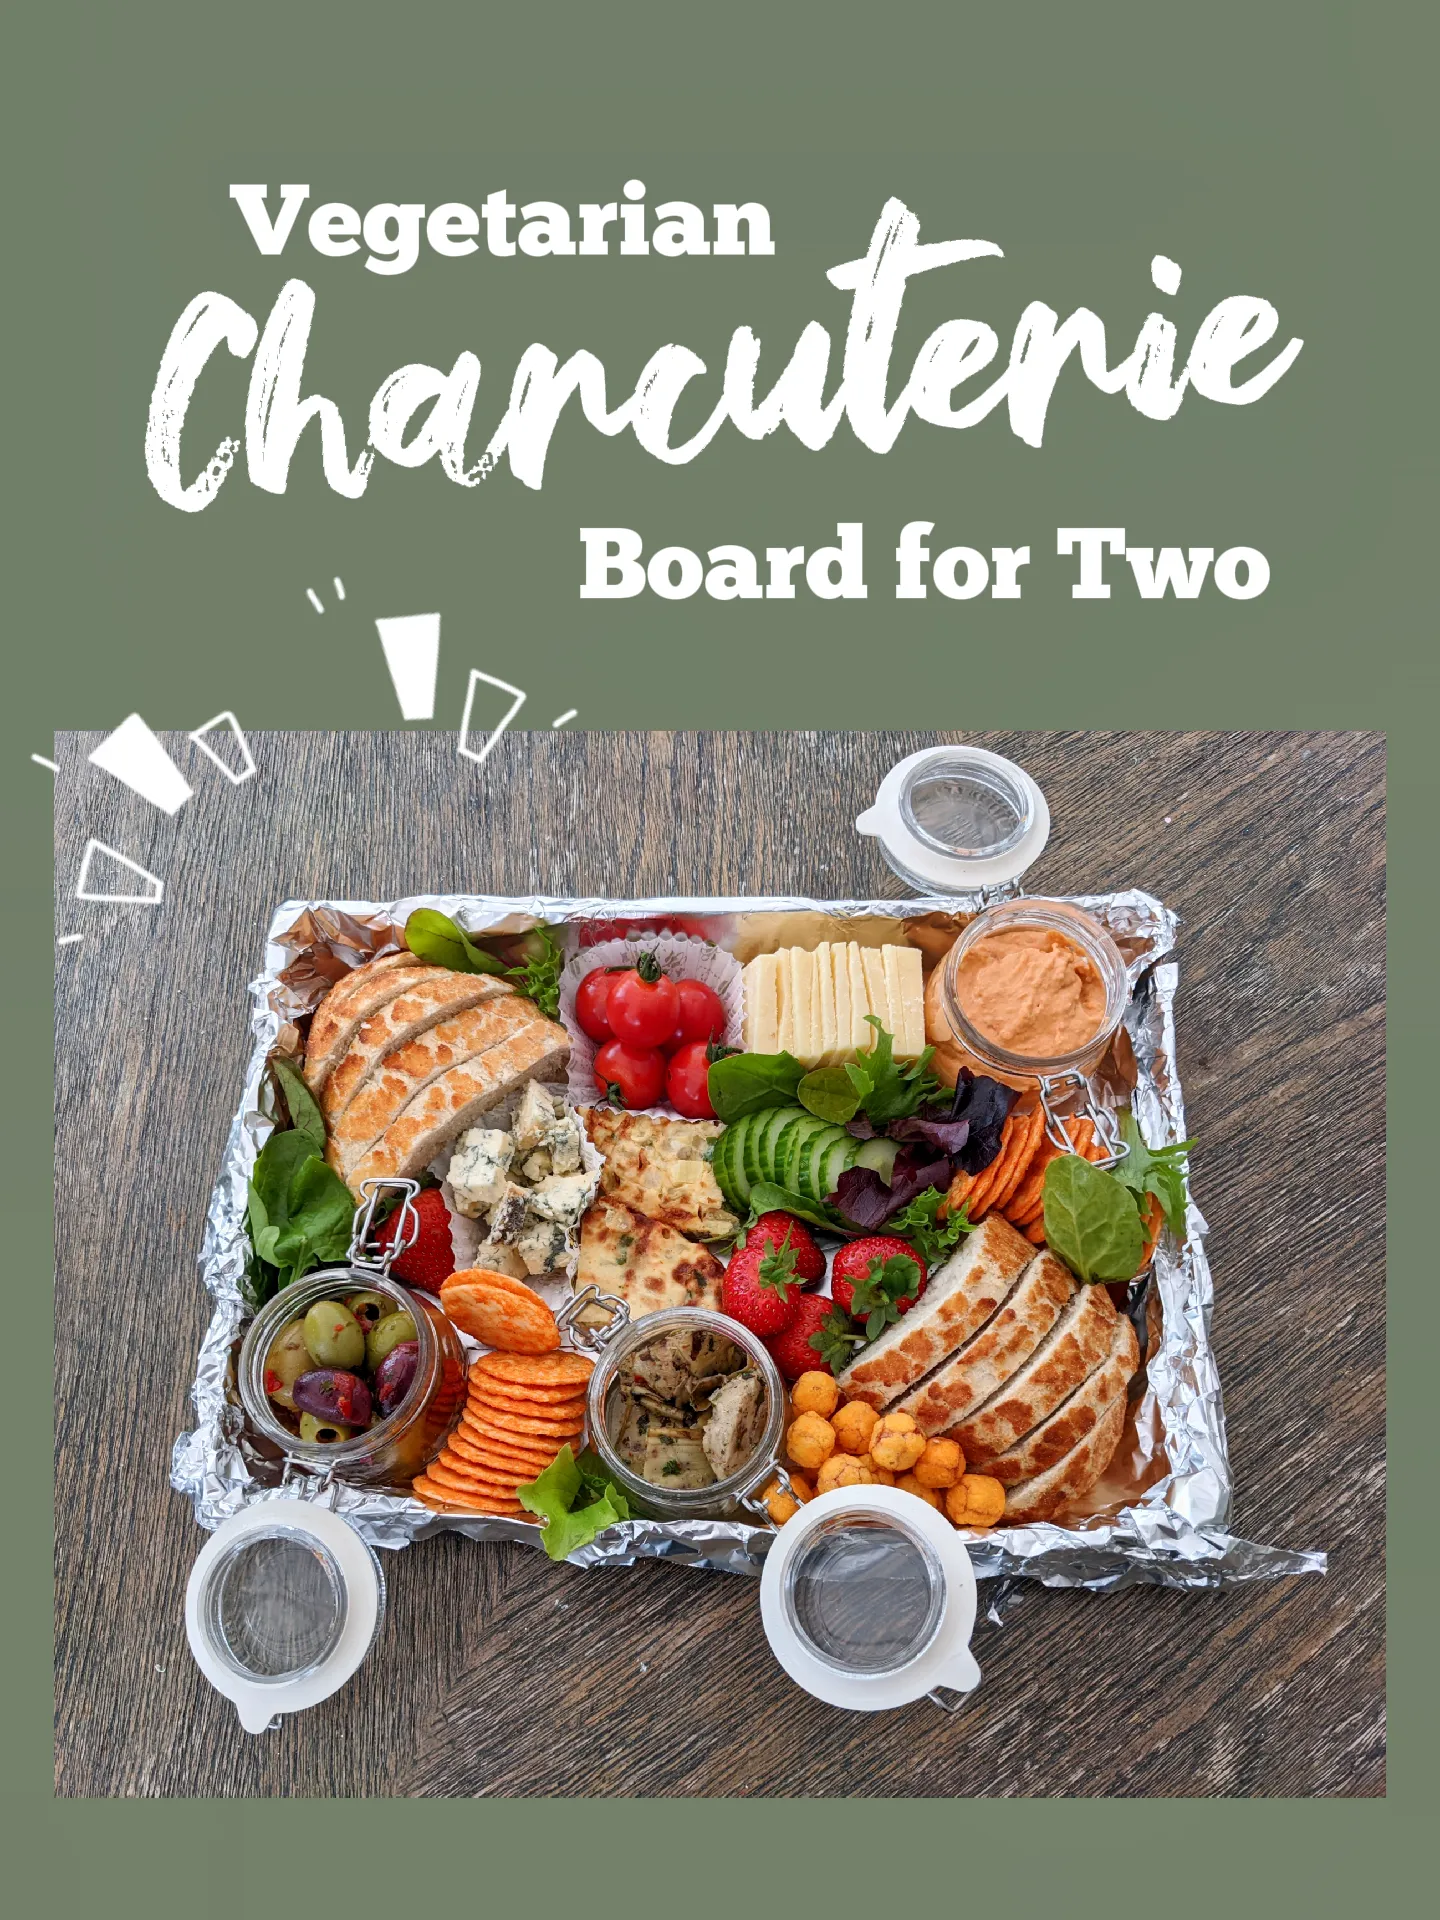 VEGETARIAN CHARCUTERIE BOARD FOR 2!, Gallery posted by liv gillett